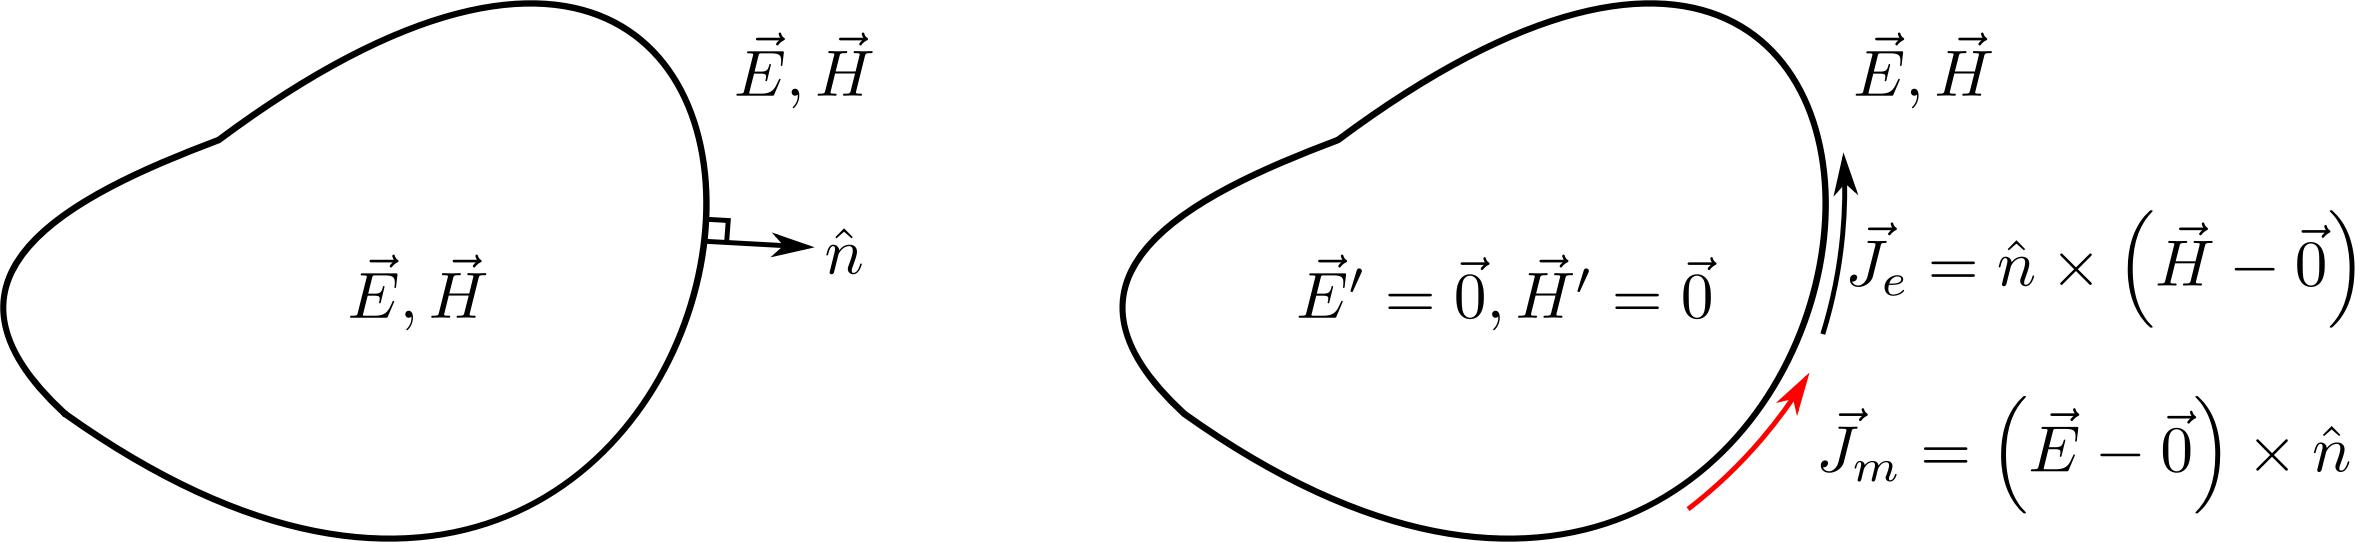 Equivalent Theorem - Corollary png